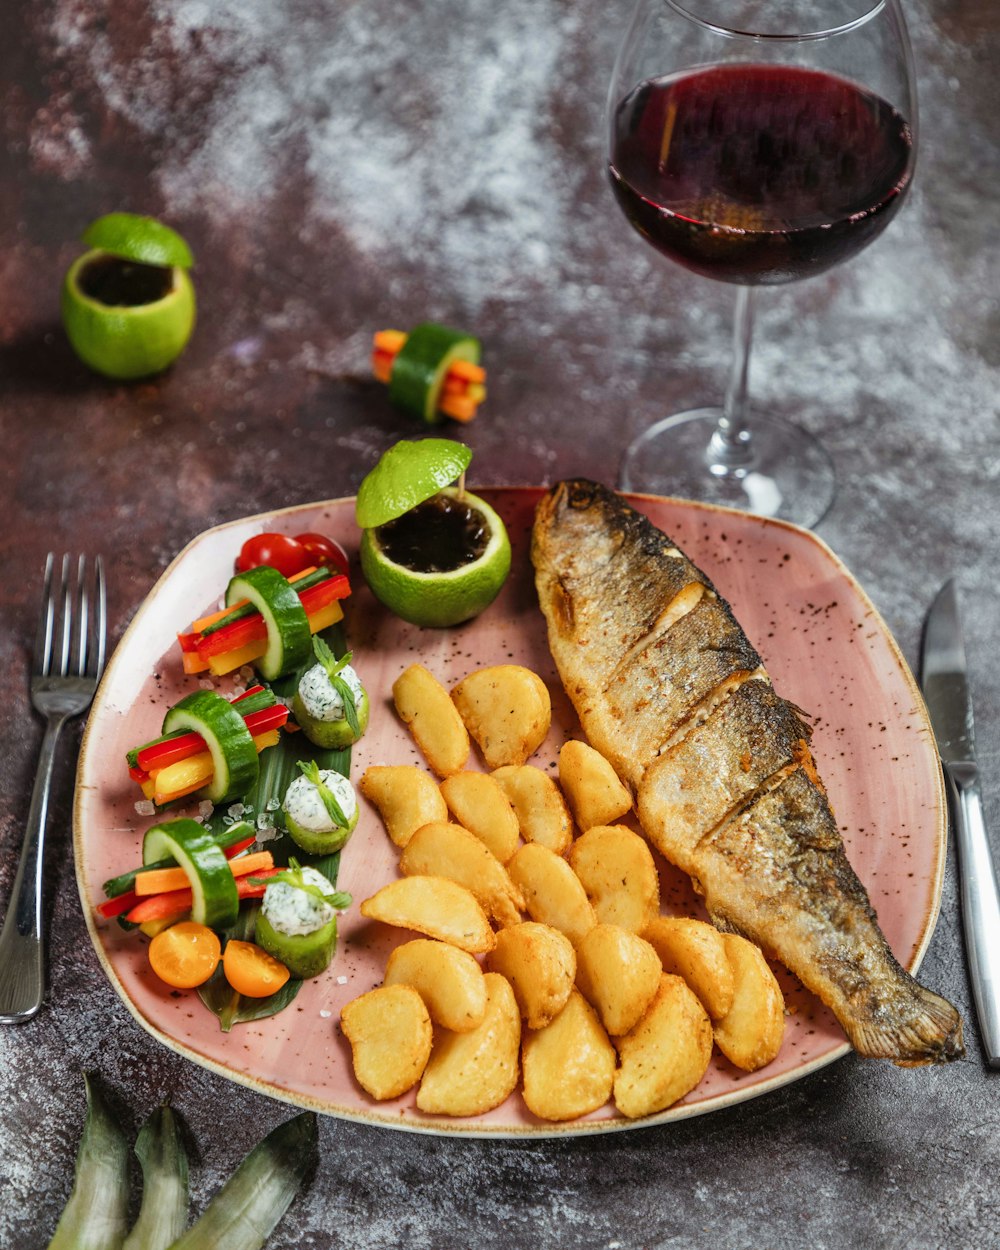 a plate of fish, potatoes, and vegetables with a glass of wine